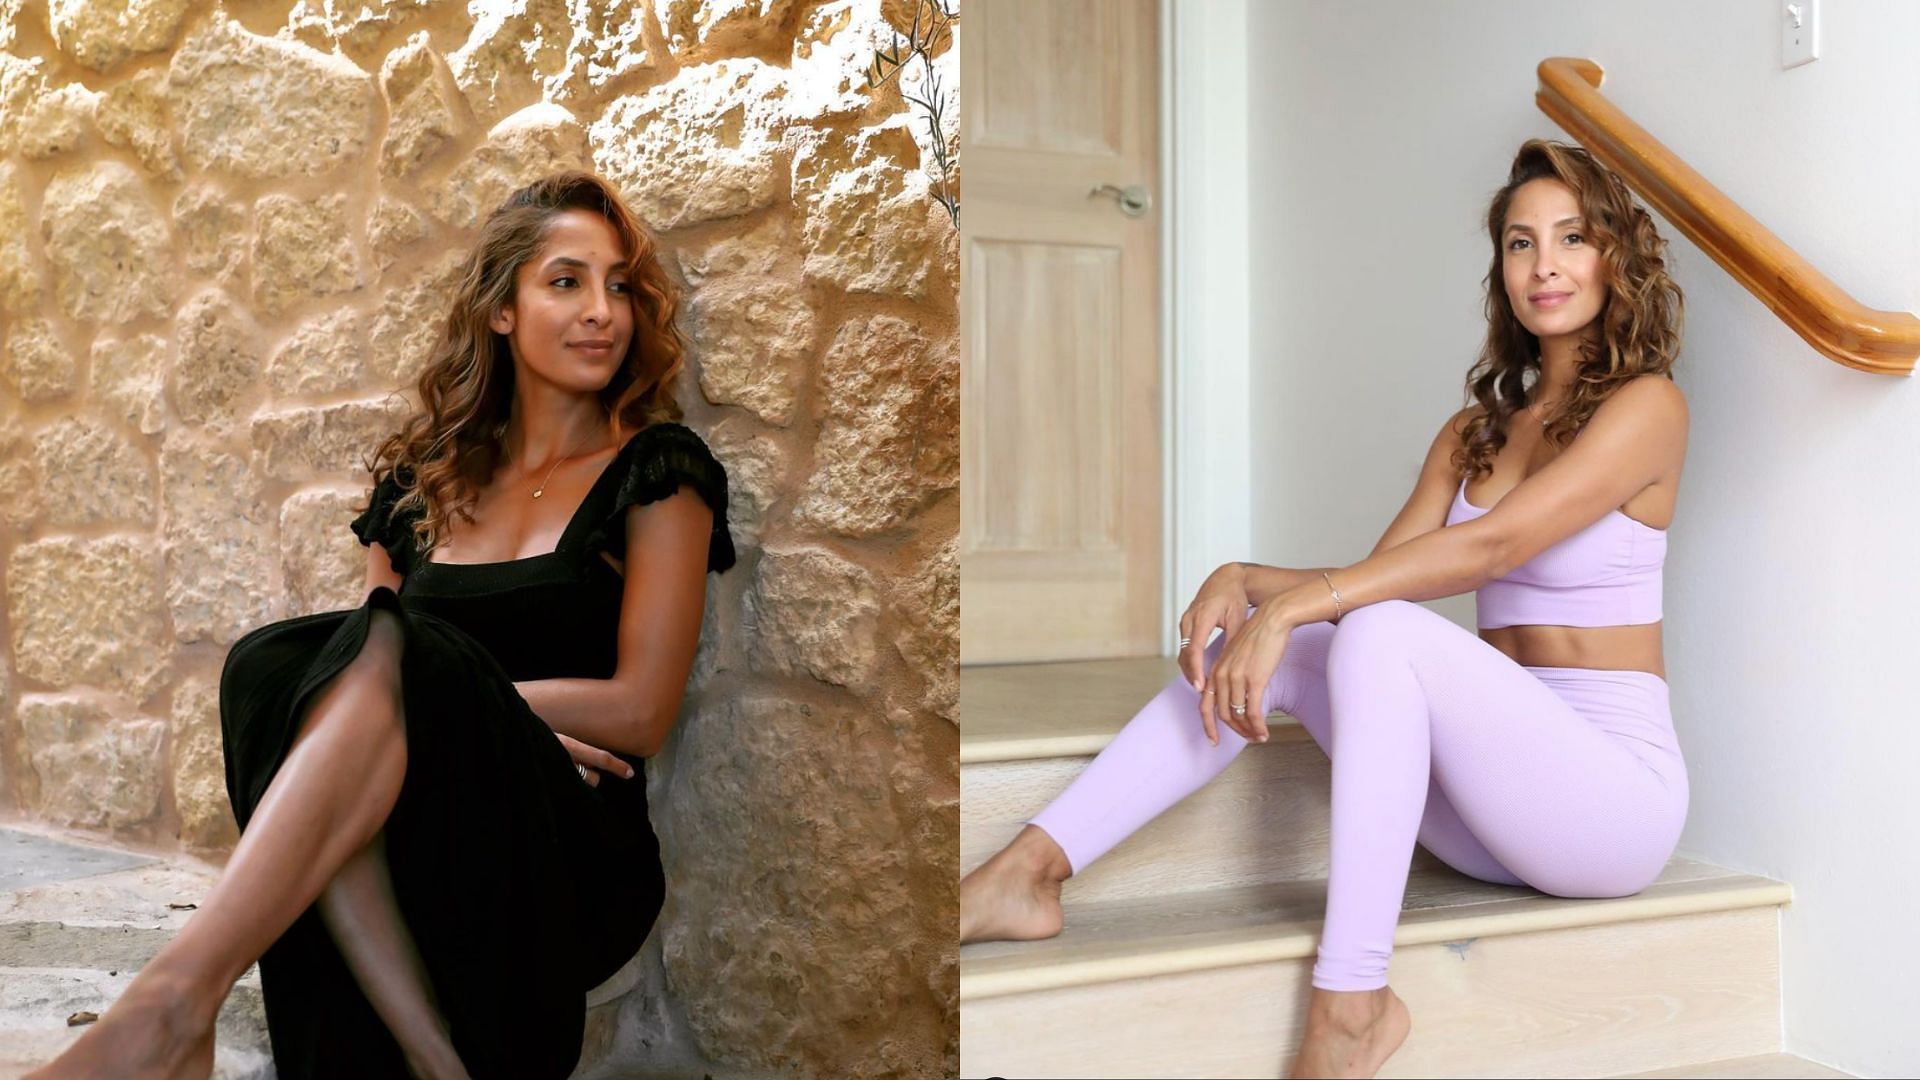 Lily on The Young and the Restless is played by actress Christel Khalil (Images via Instagram)